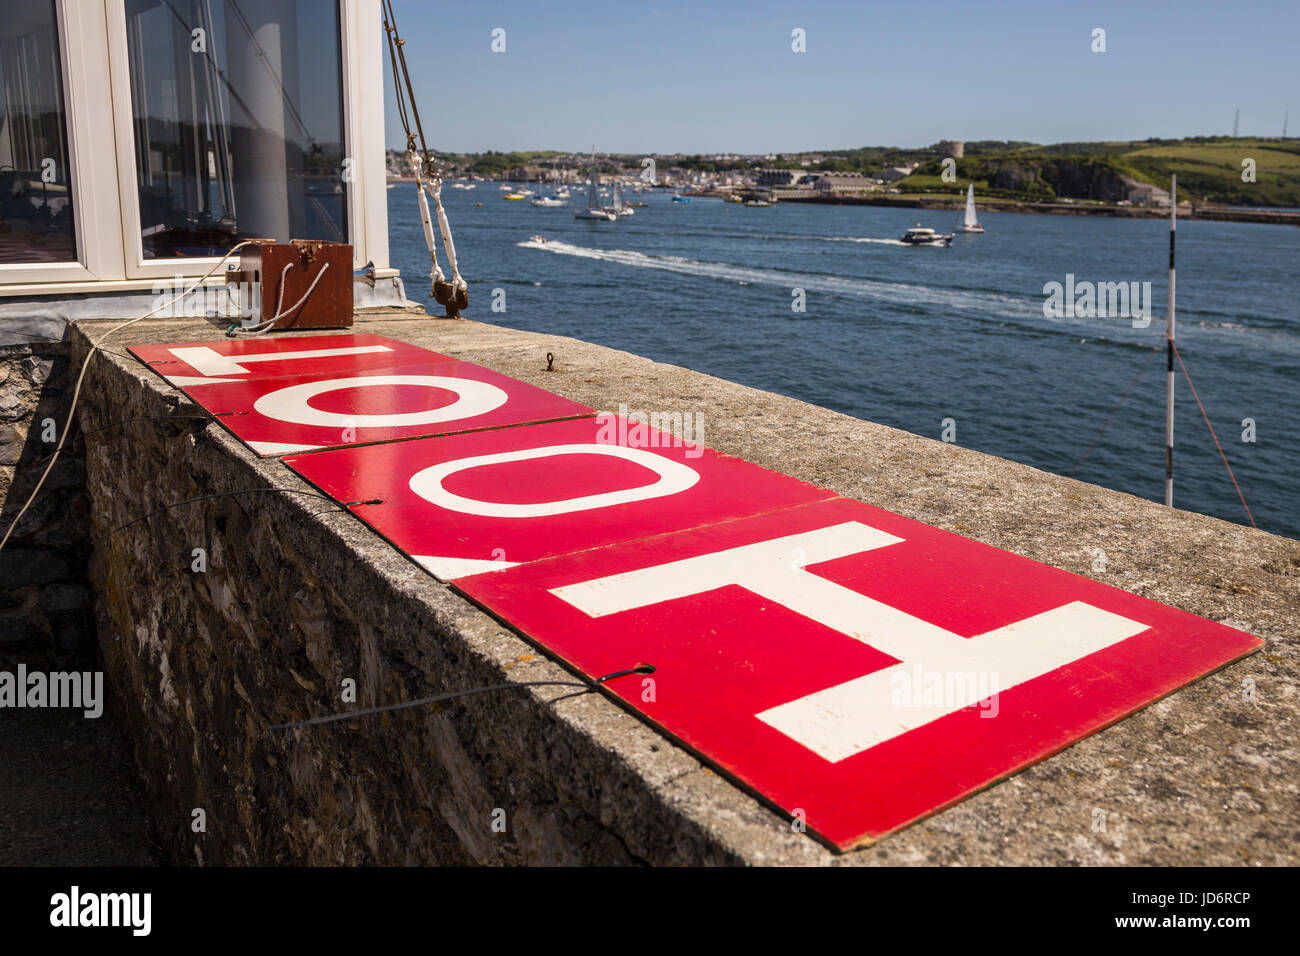 Hoot! The Royal Corinthean Yacht Club, Plymouth, uses a hoot sign rather than a claxon when there is a wedding at the premises. Stock Photo